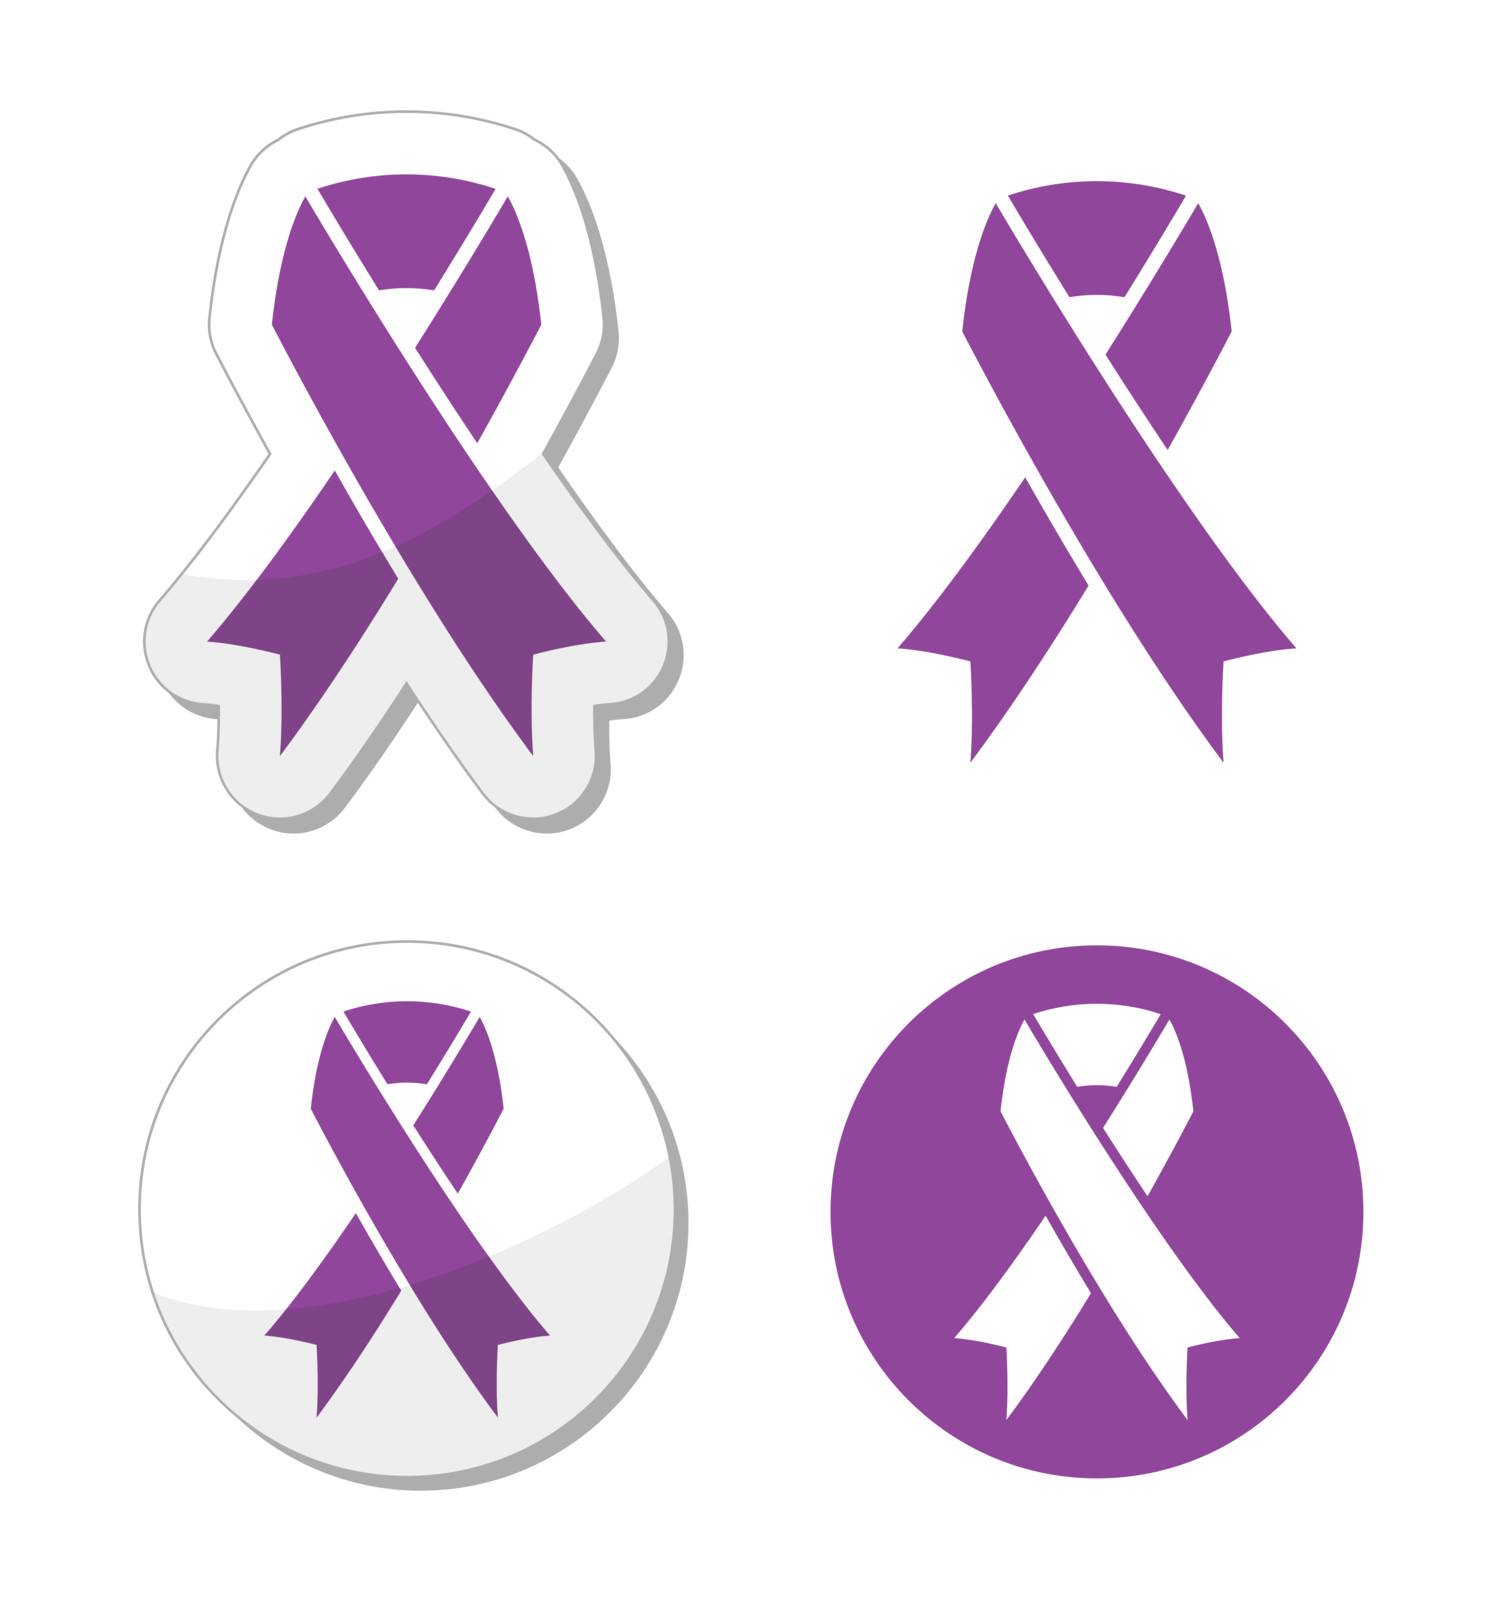 The internationl symbol symbol of pancreatic cancer, testicular cancer, thyroid cancer, domestic violence, ADD, alzheimer's, religious tolerance, animal abuse, the victims of 9/11 - purple riboon isolated on white